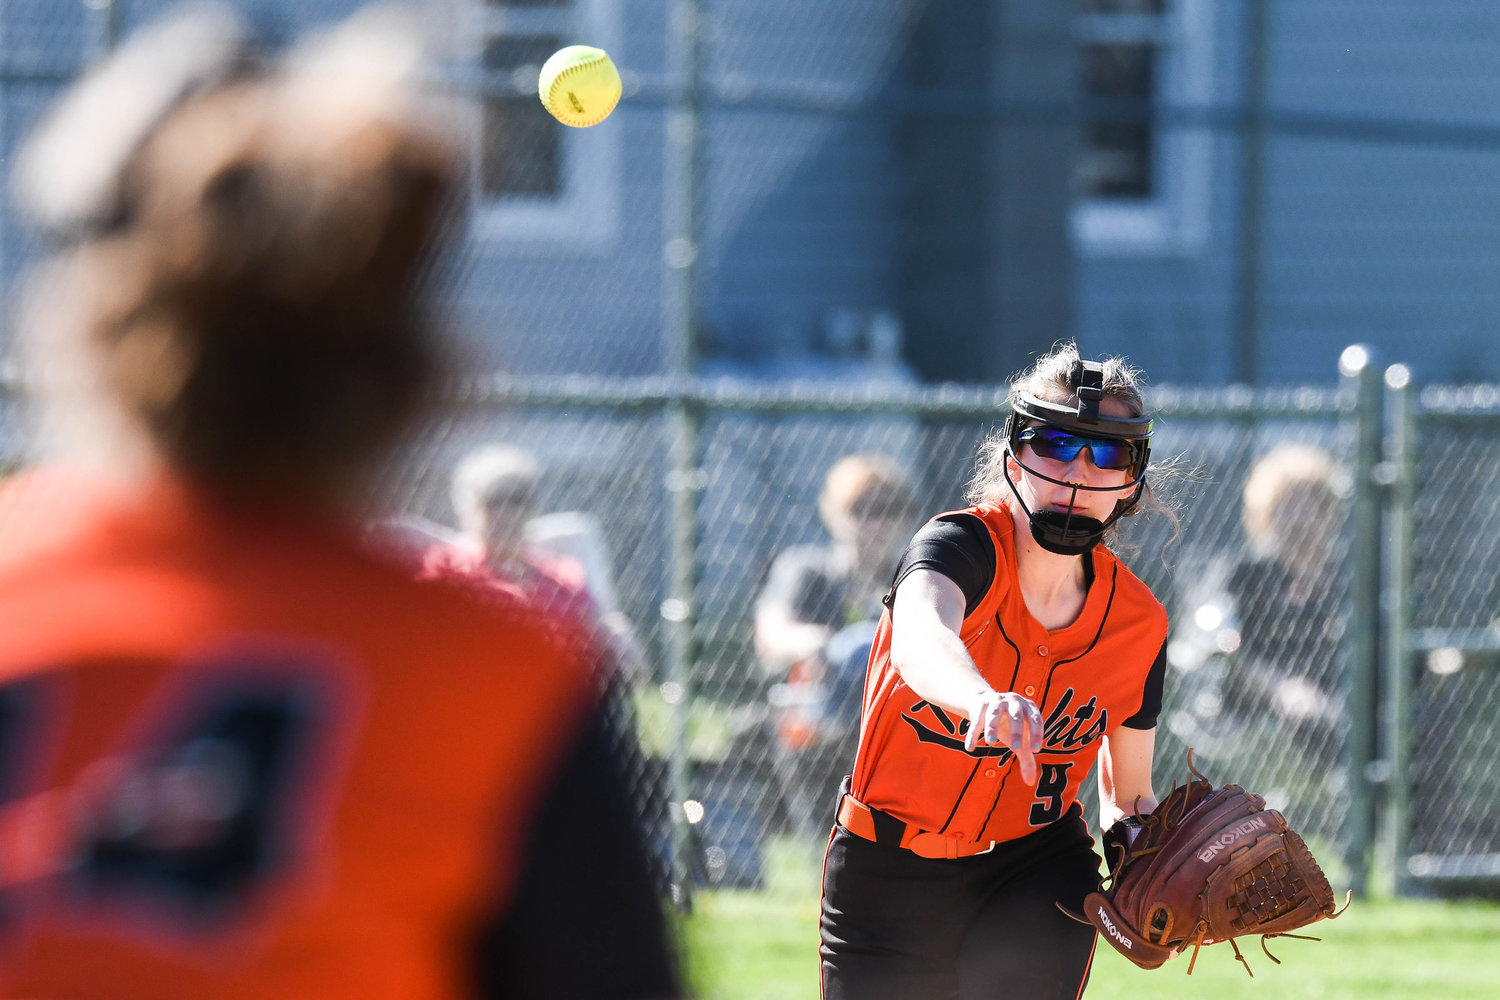 Rome Free Academy’s Adrianna Varano makes a throw to first base during the Tri-Valley League softball game against Central Valley Academy on Tuesday in Ilion. The Black Knights won 10-0.